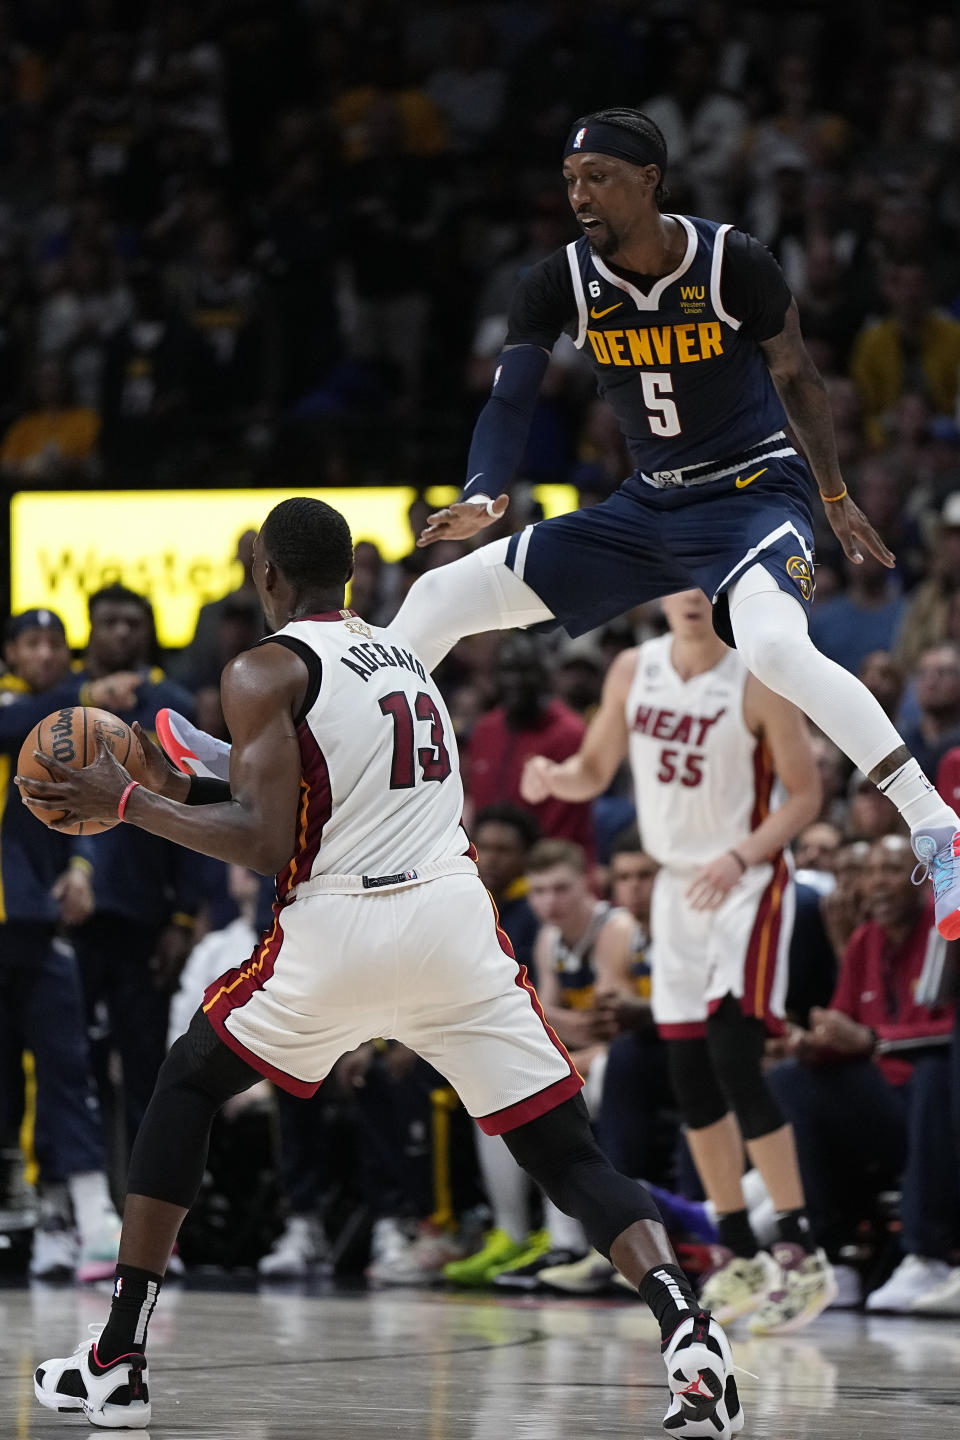 Miami Heat center Bam Adebayo (13) looks to pass while defended by Denver Nuggets guard Kentavious Caldwell-Pope (5) during the second half of Game 2 of basketball's NBA Finals, Sunday, June 4, 2023, in Denver. (AP Photo/Mark J. Terrill)